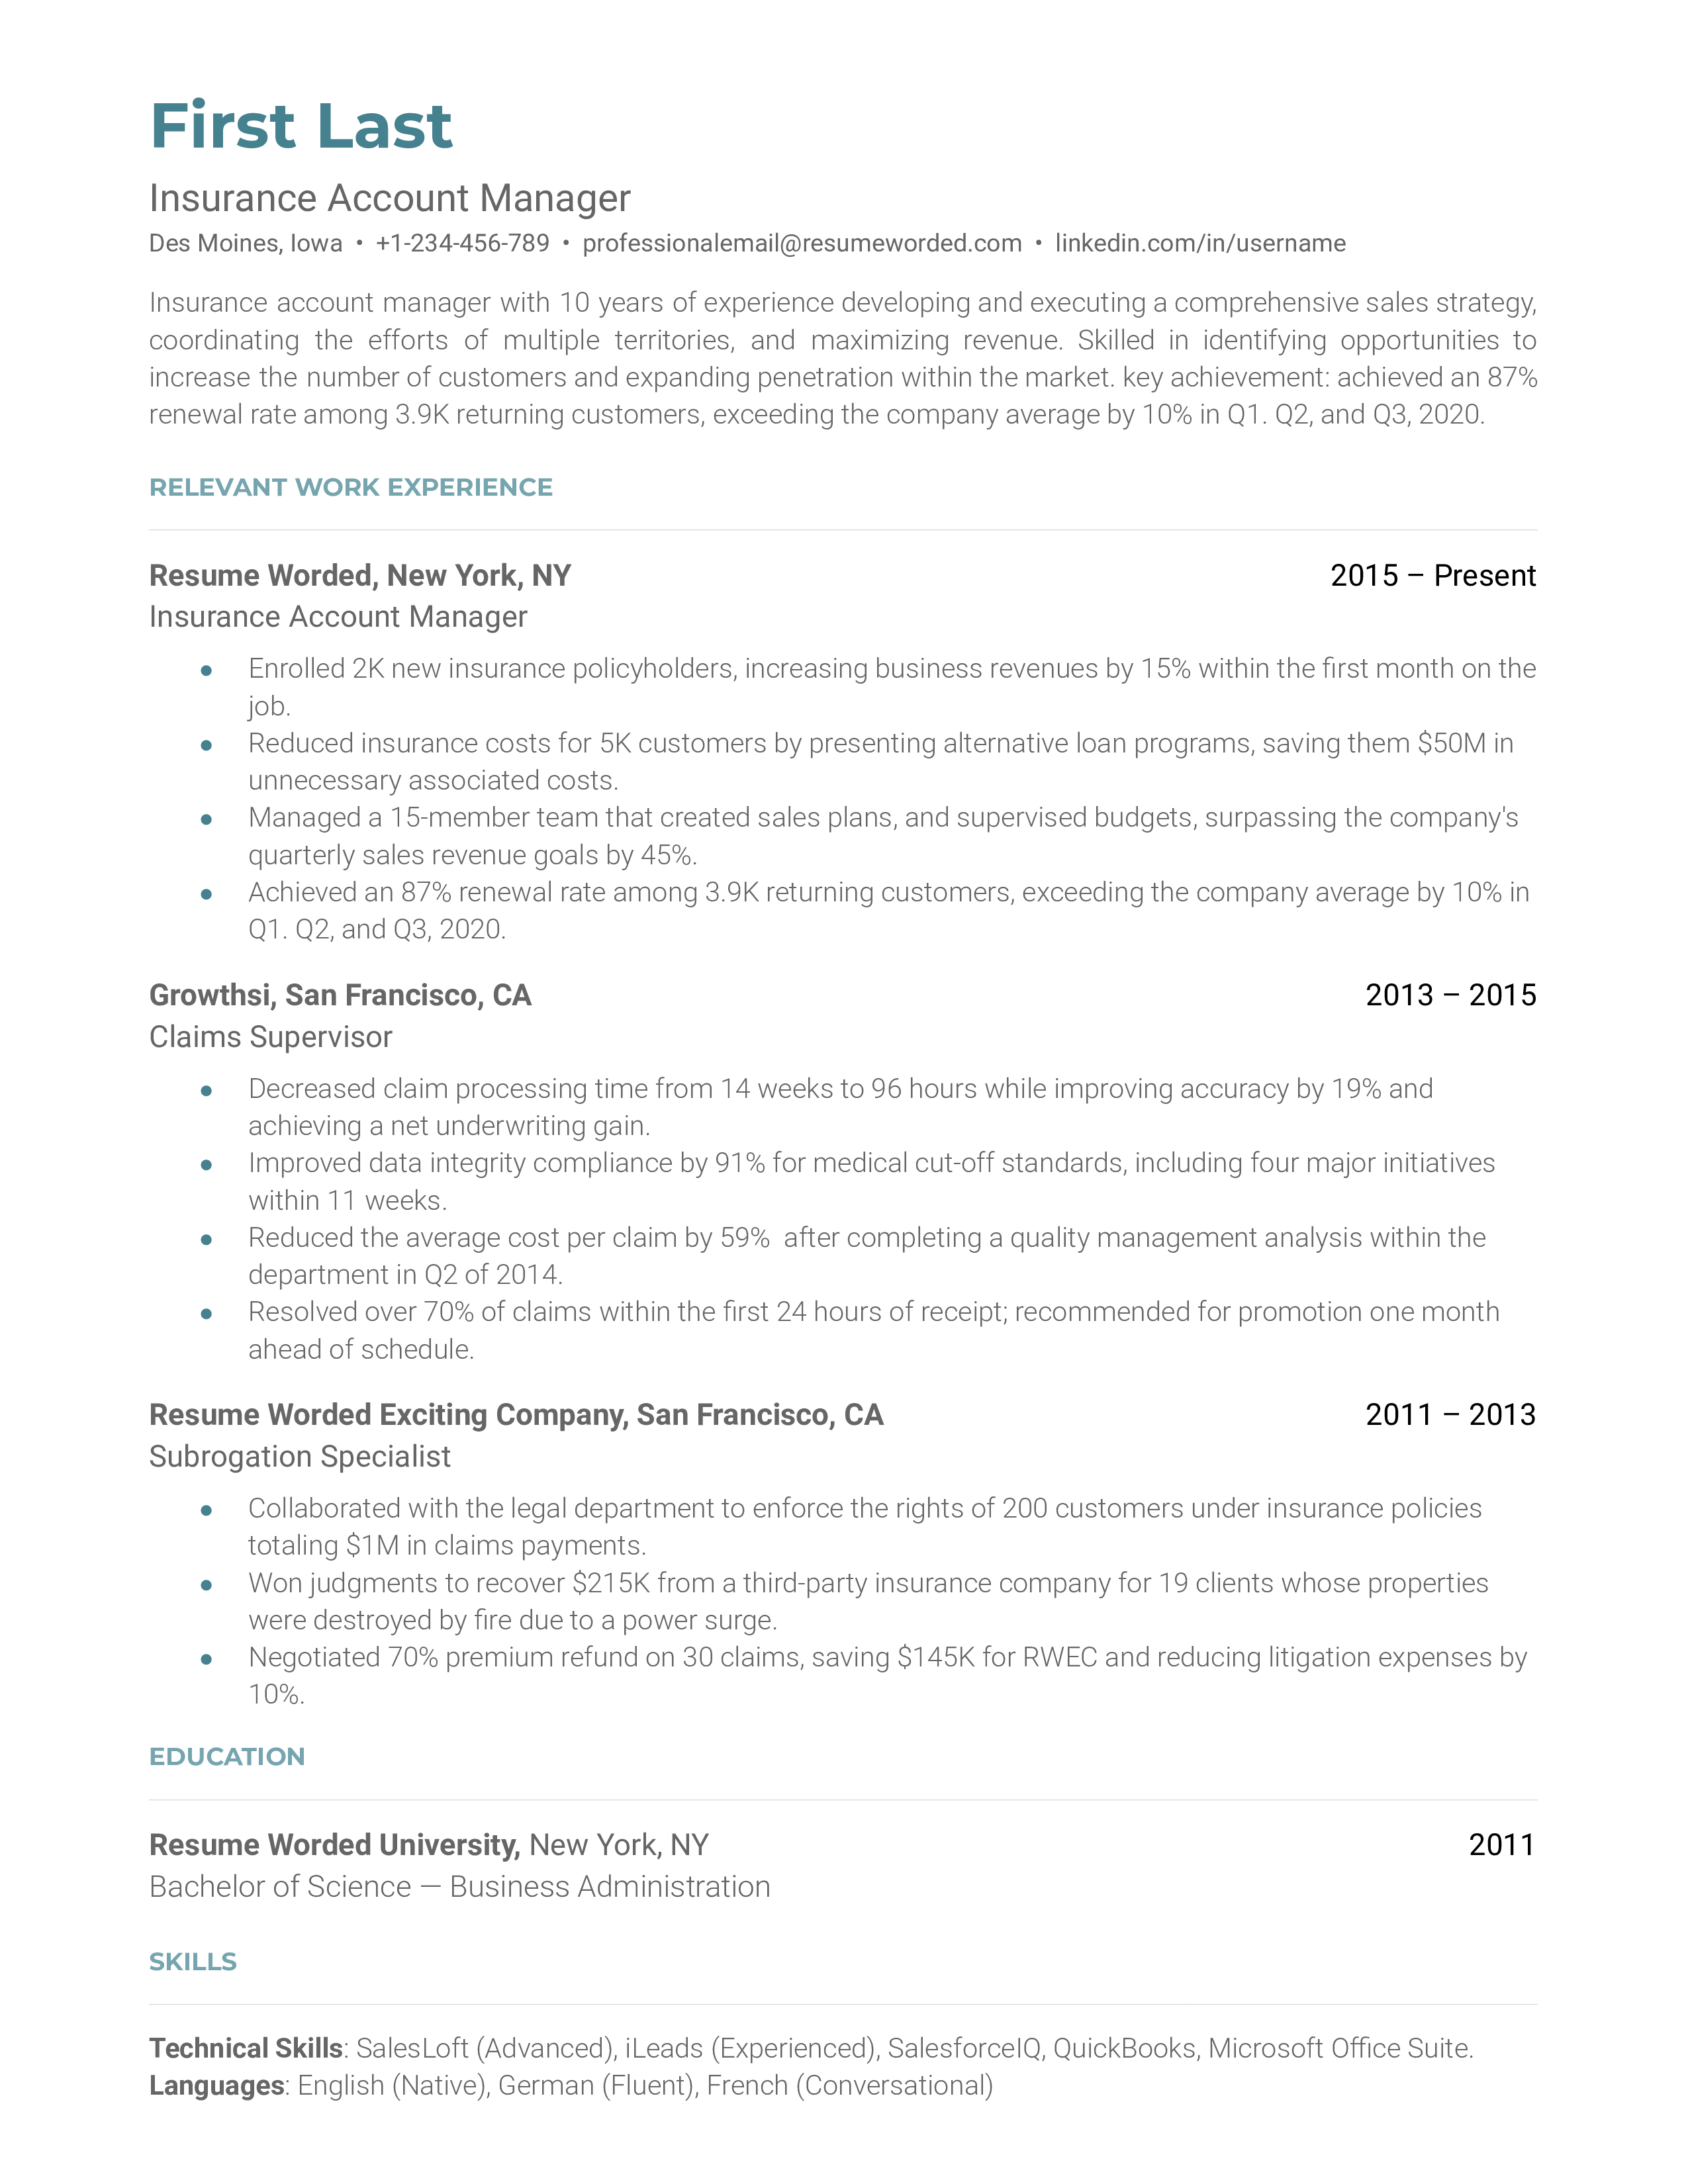 An insurance account manager resume sample that highlights the applicant’s insurance background and key achievements.